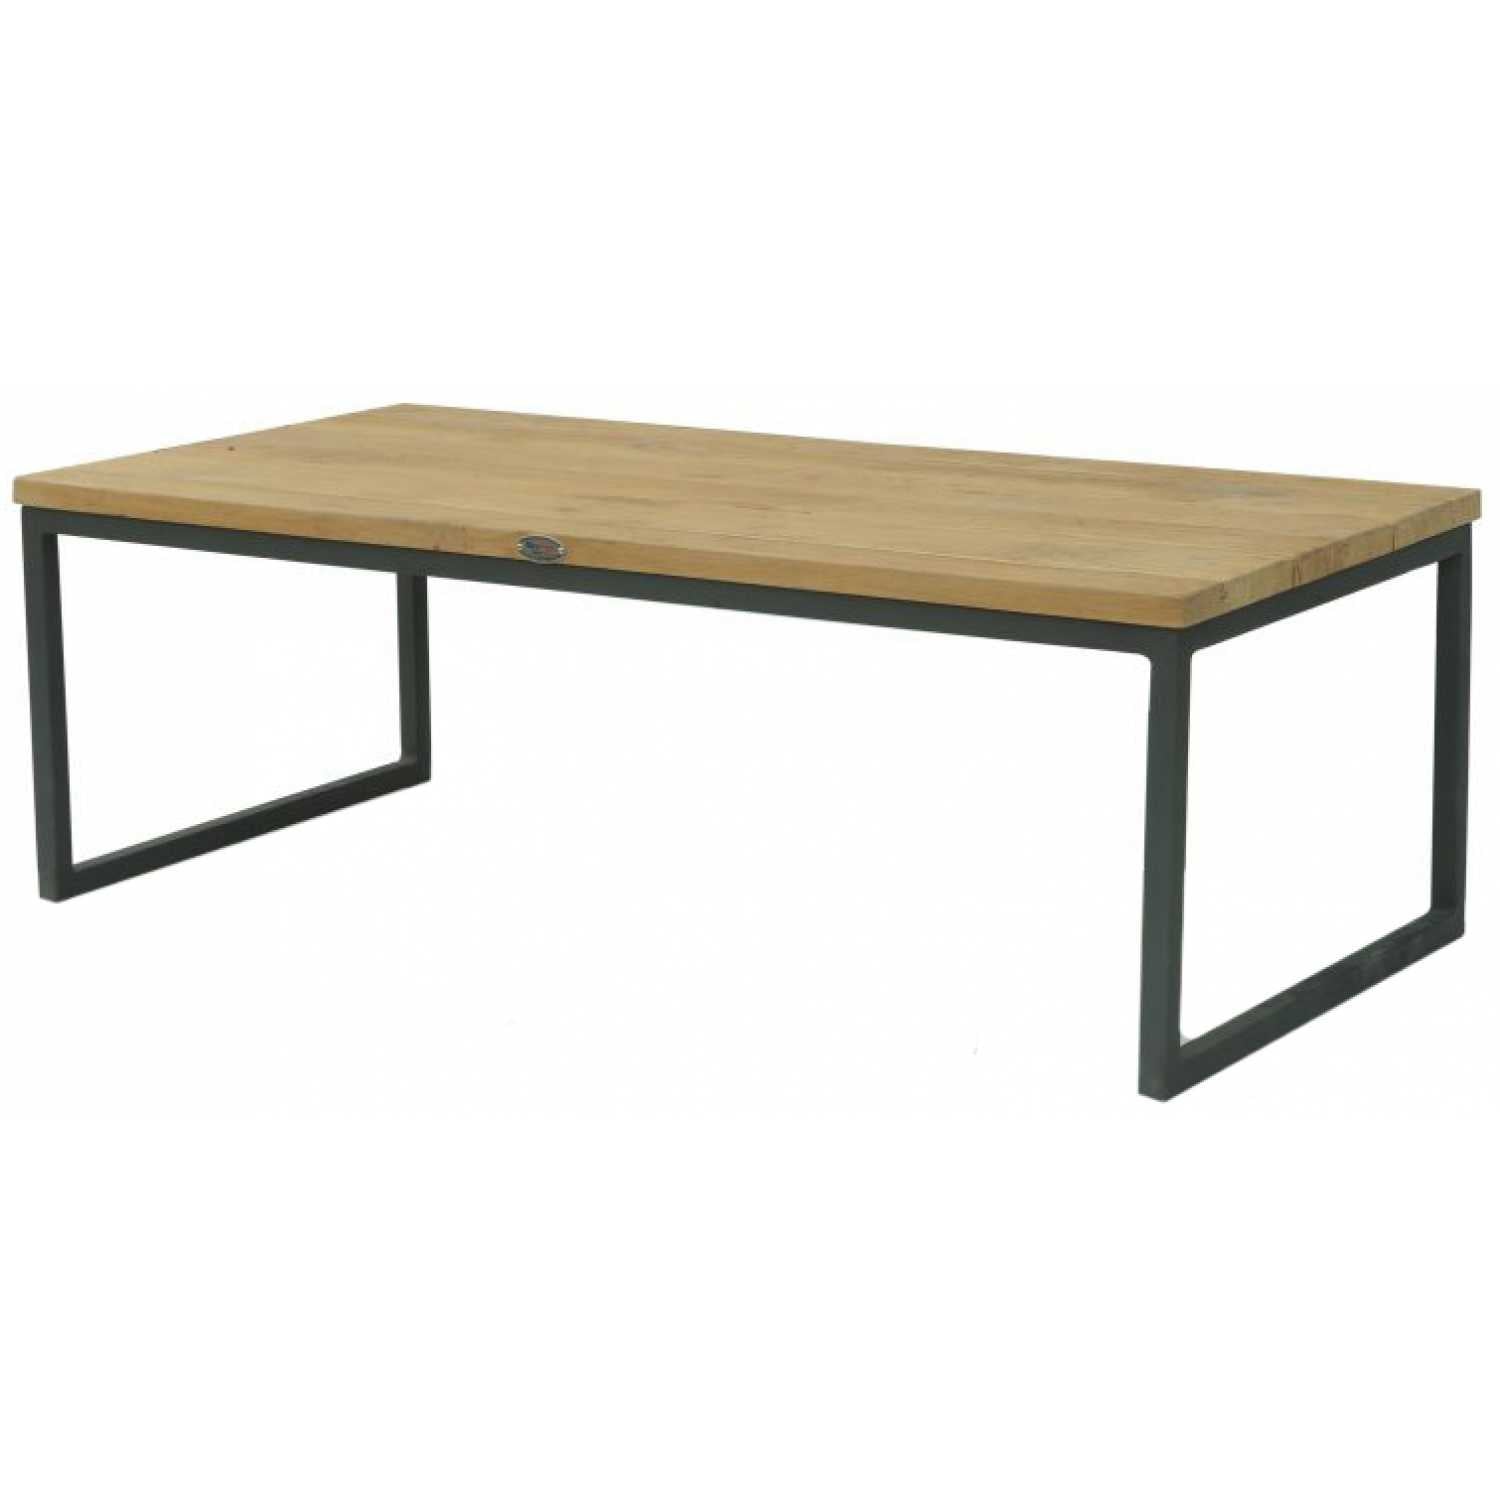 Nautic Coffee Table- Matte Carbon (Square or Rectangle) - PadioLiving - Nautic Coffee Table- Matte Carbon (Square or Rectangle) - Coffee Tables - Rectangle Coffee Table - PadioLiving